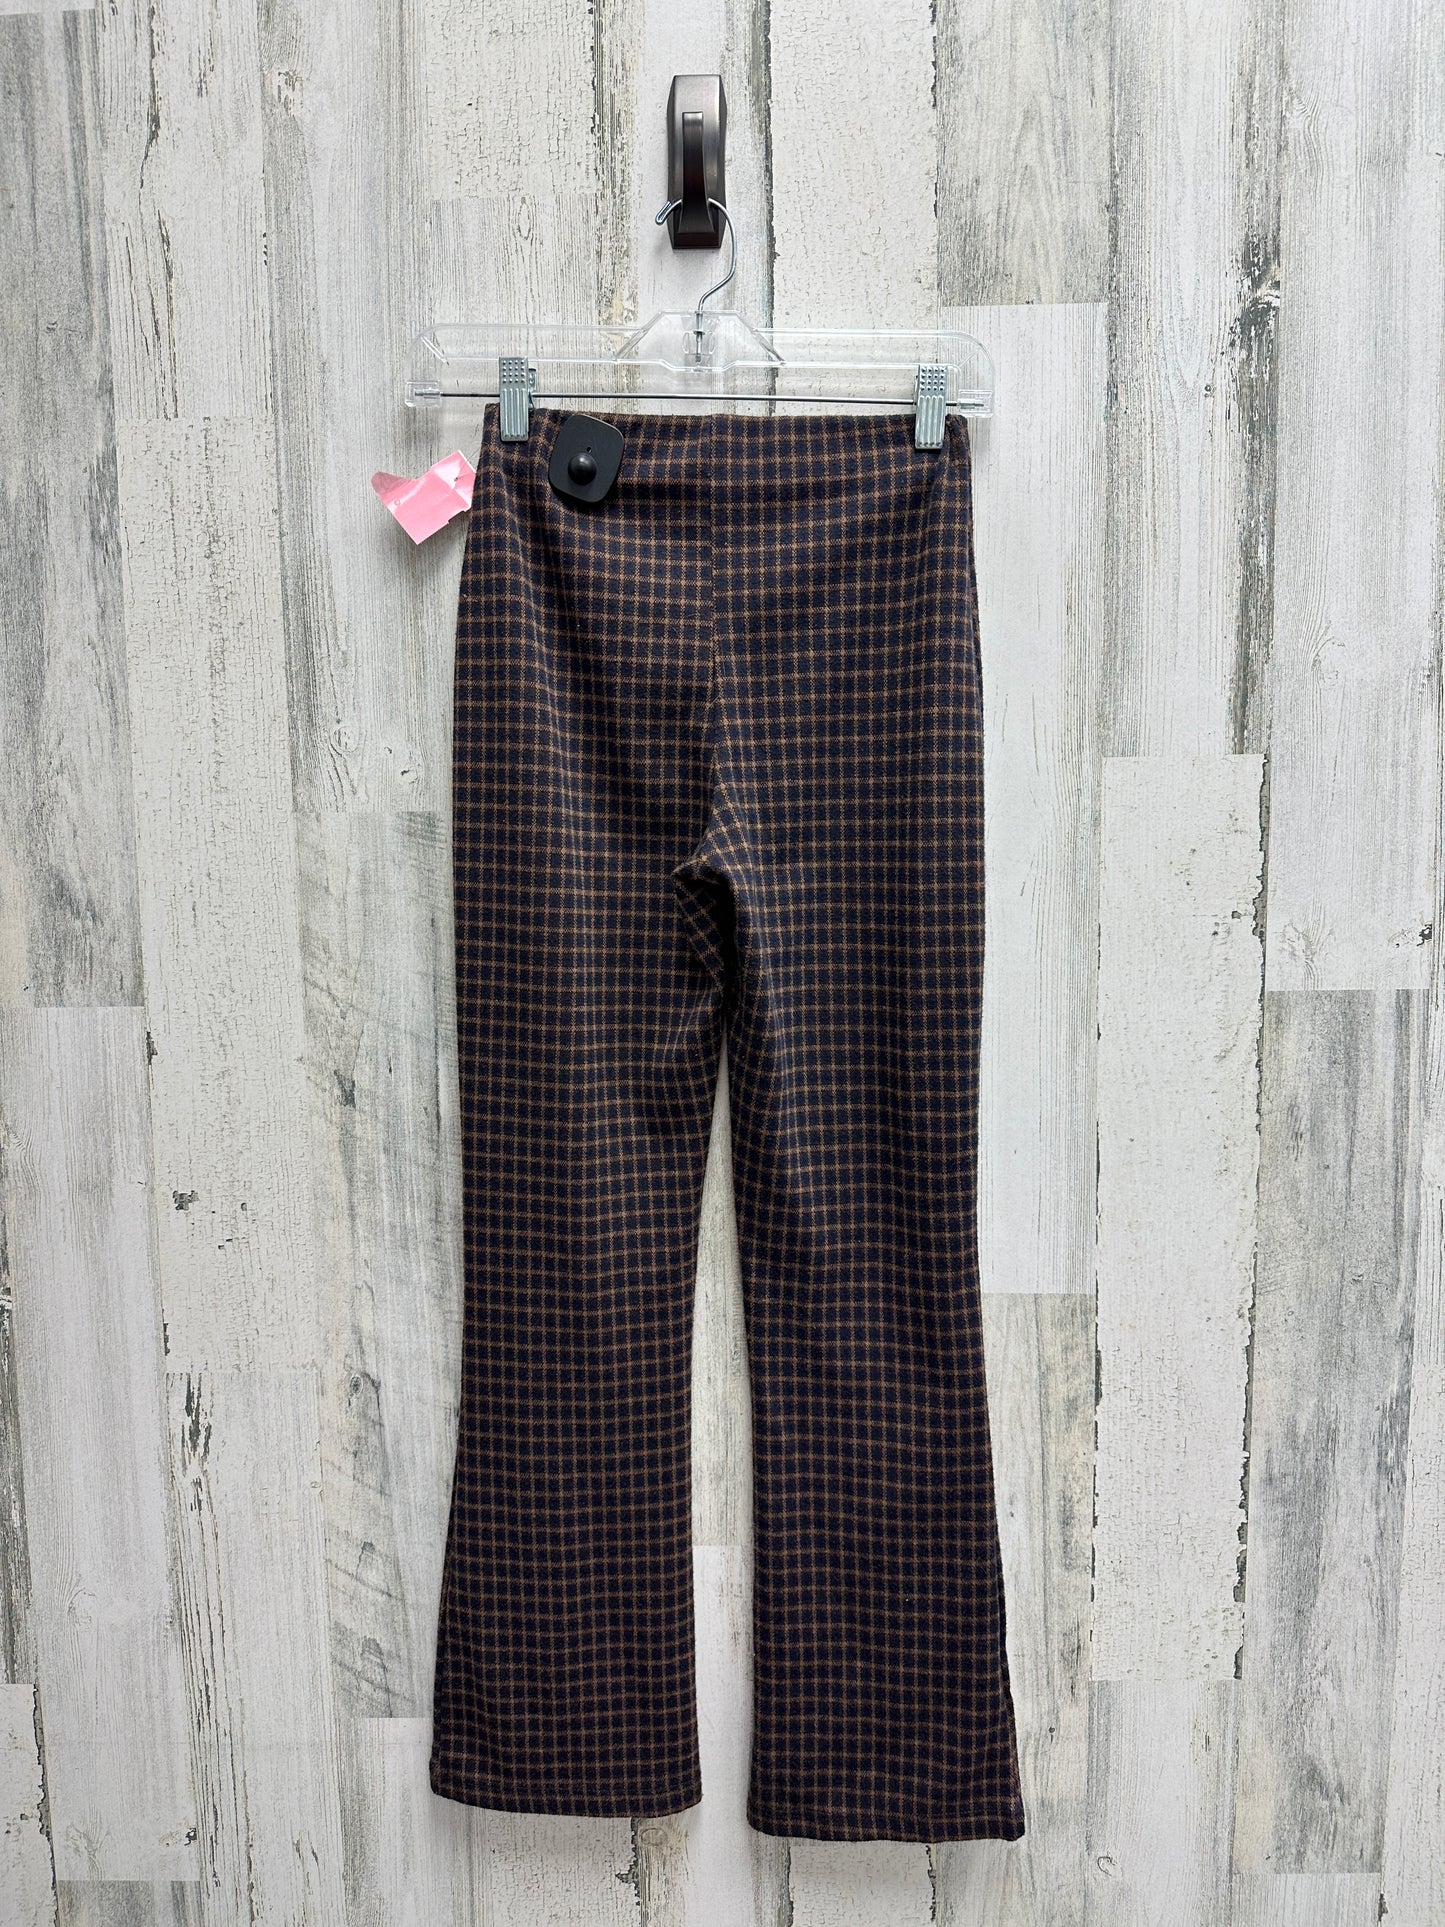 Pants Ankle By Urban Outfitters  Size: S